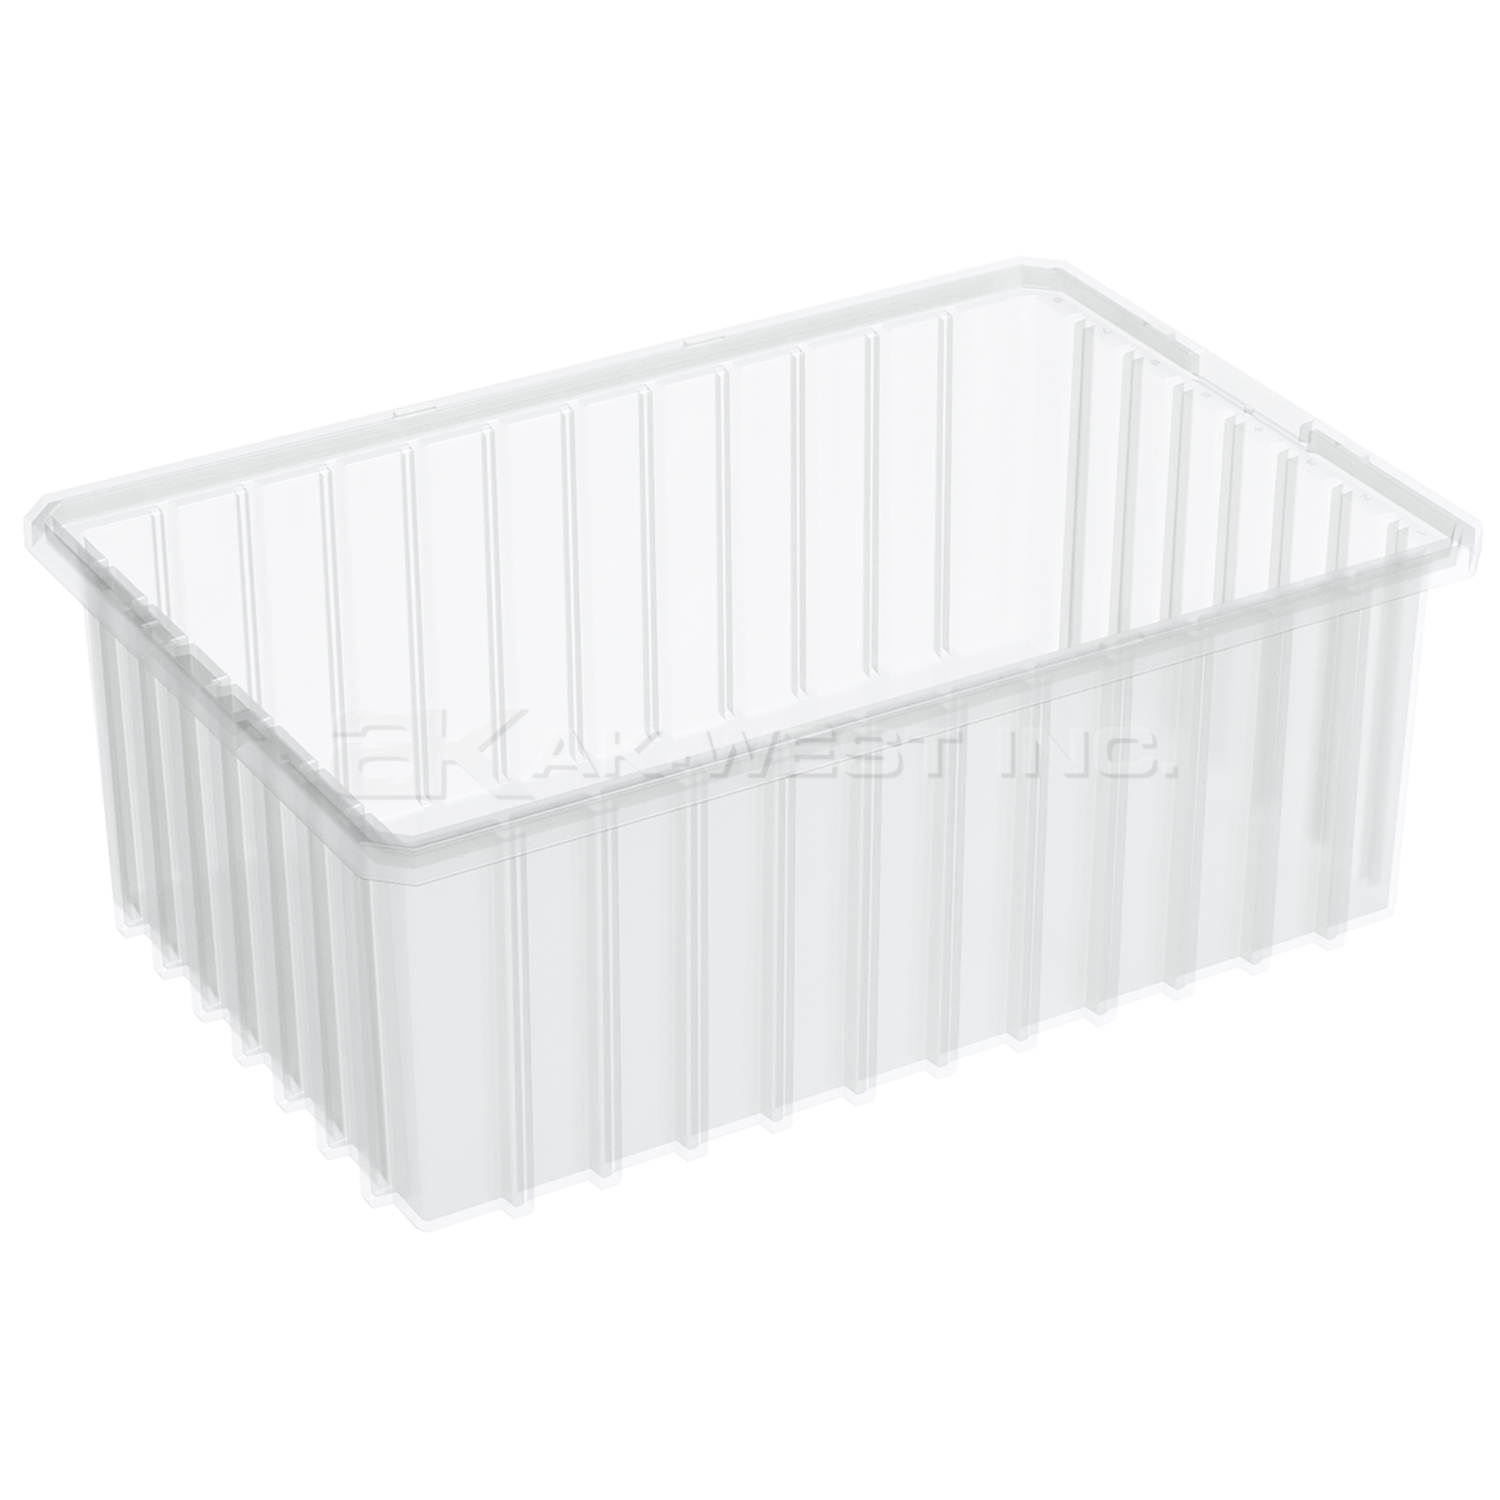 Clear, 16-1/2" x 10-7/8" x 6" Dividable Grid Container (8 Per Carton)